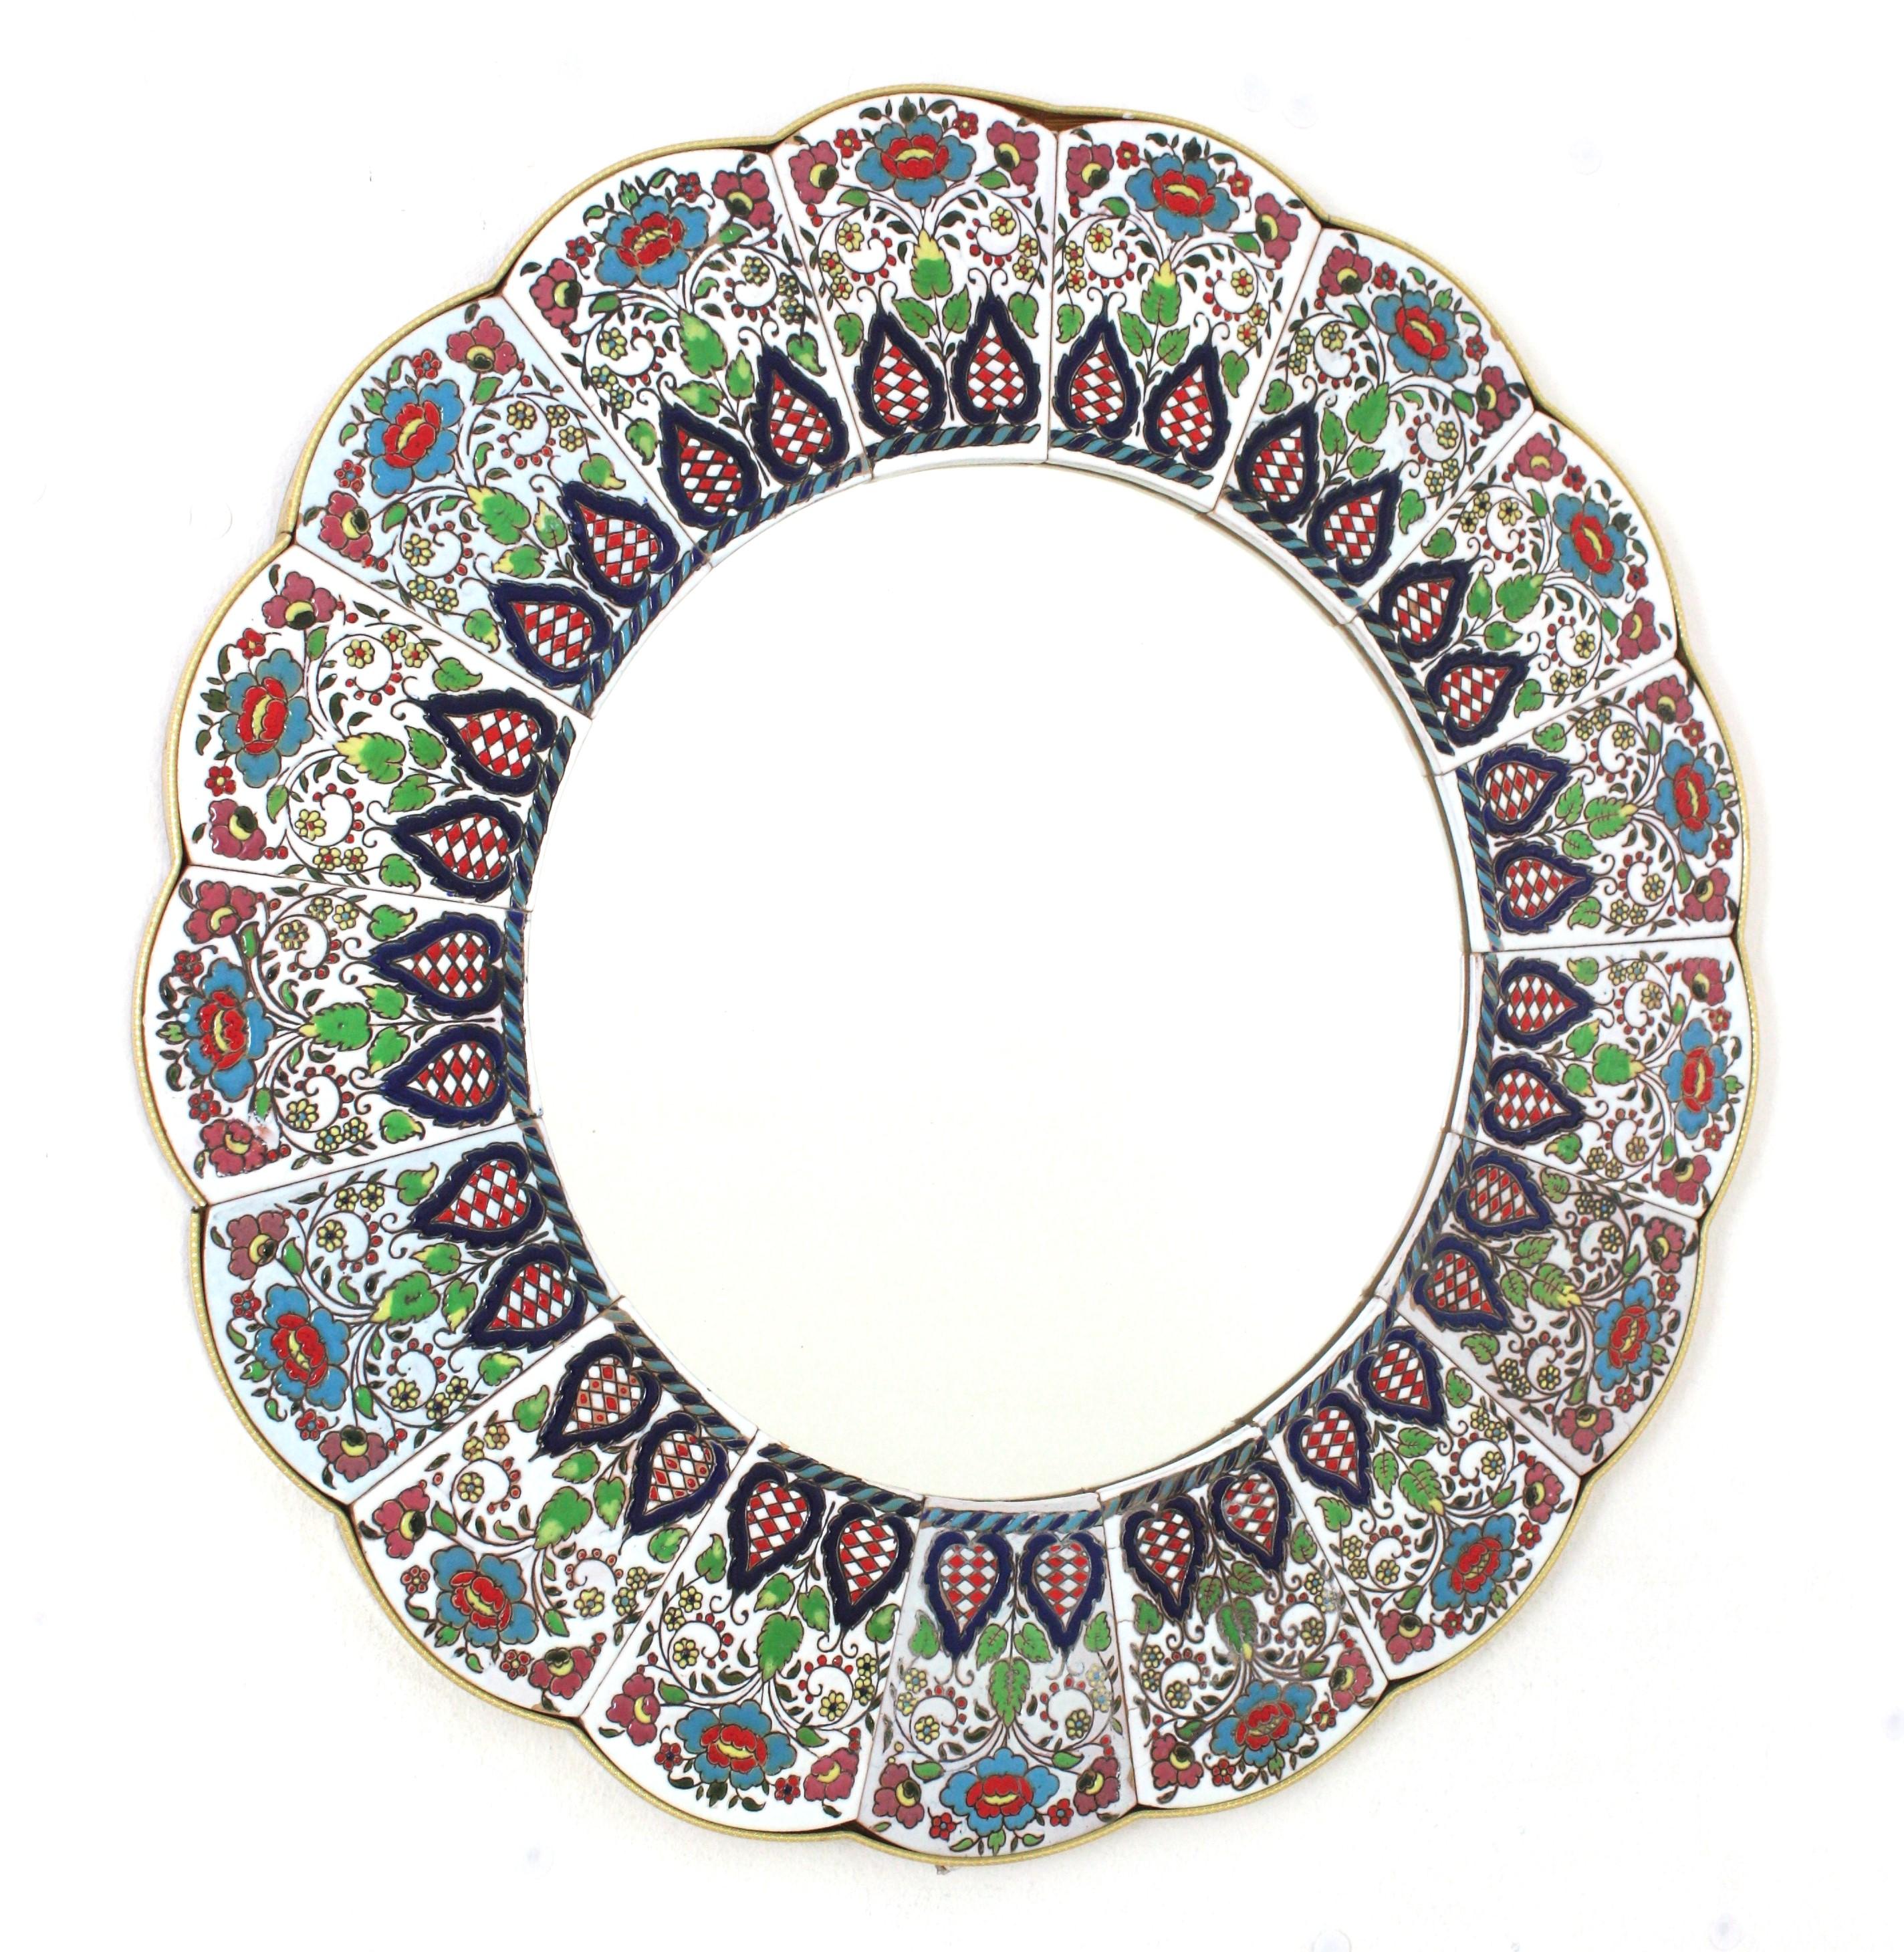 Eye-catching Mid-Century Modern Majolica Glazed Ceramic Mirror. Manufactured in Spain, 1960s.
Scalloped flower shape and colorful frame.
This handcrafted wall mirror is made of glazed ceramic tiles with handpainted multi-color floral and foliage